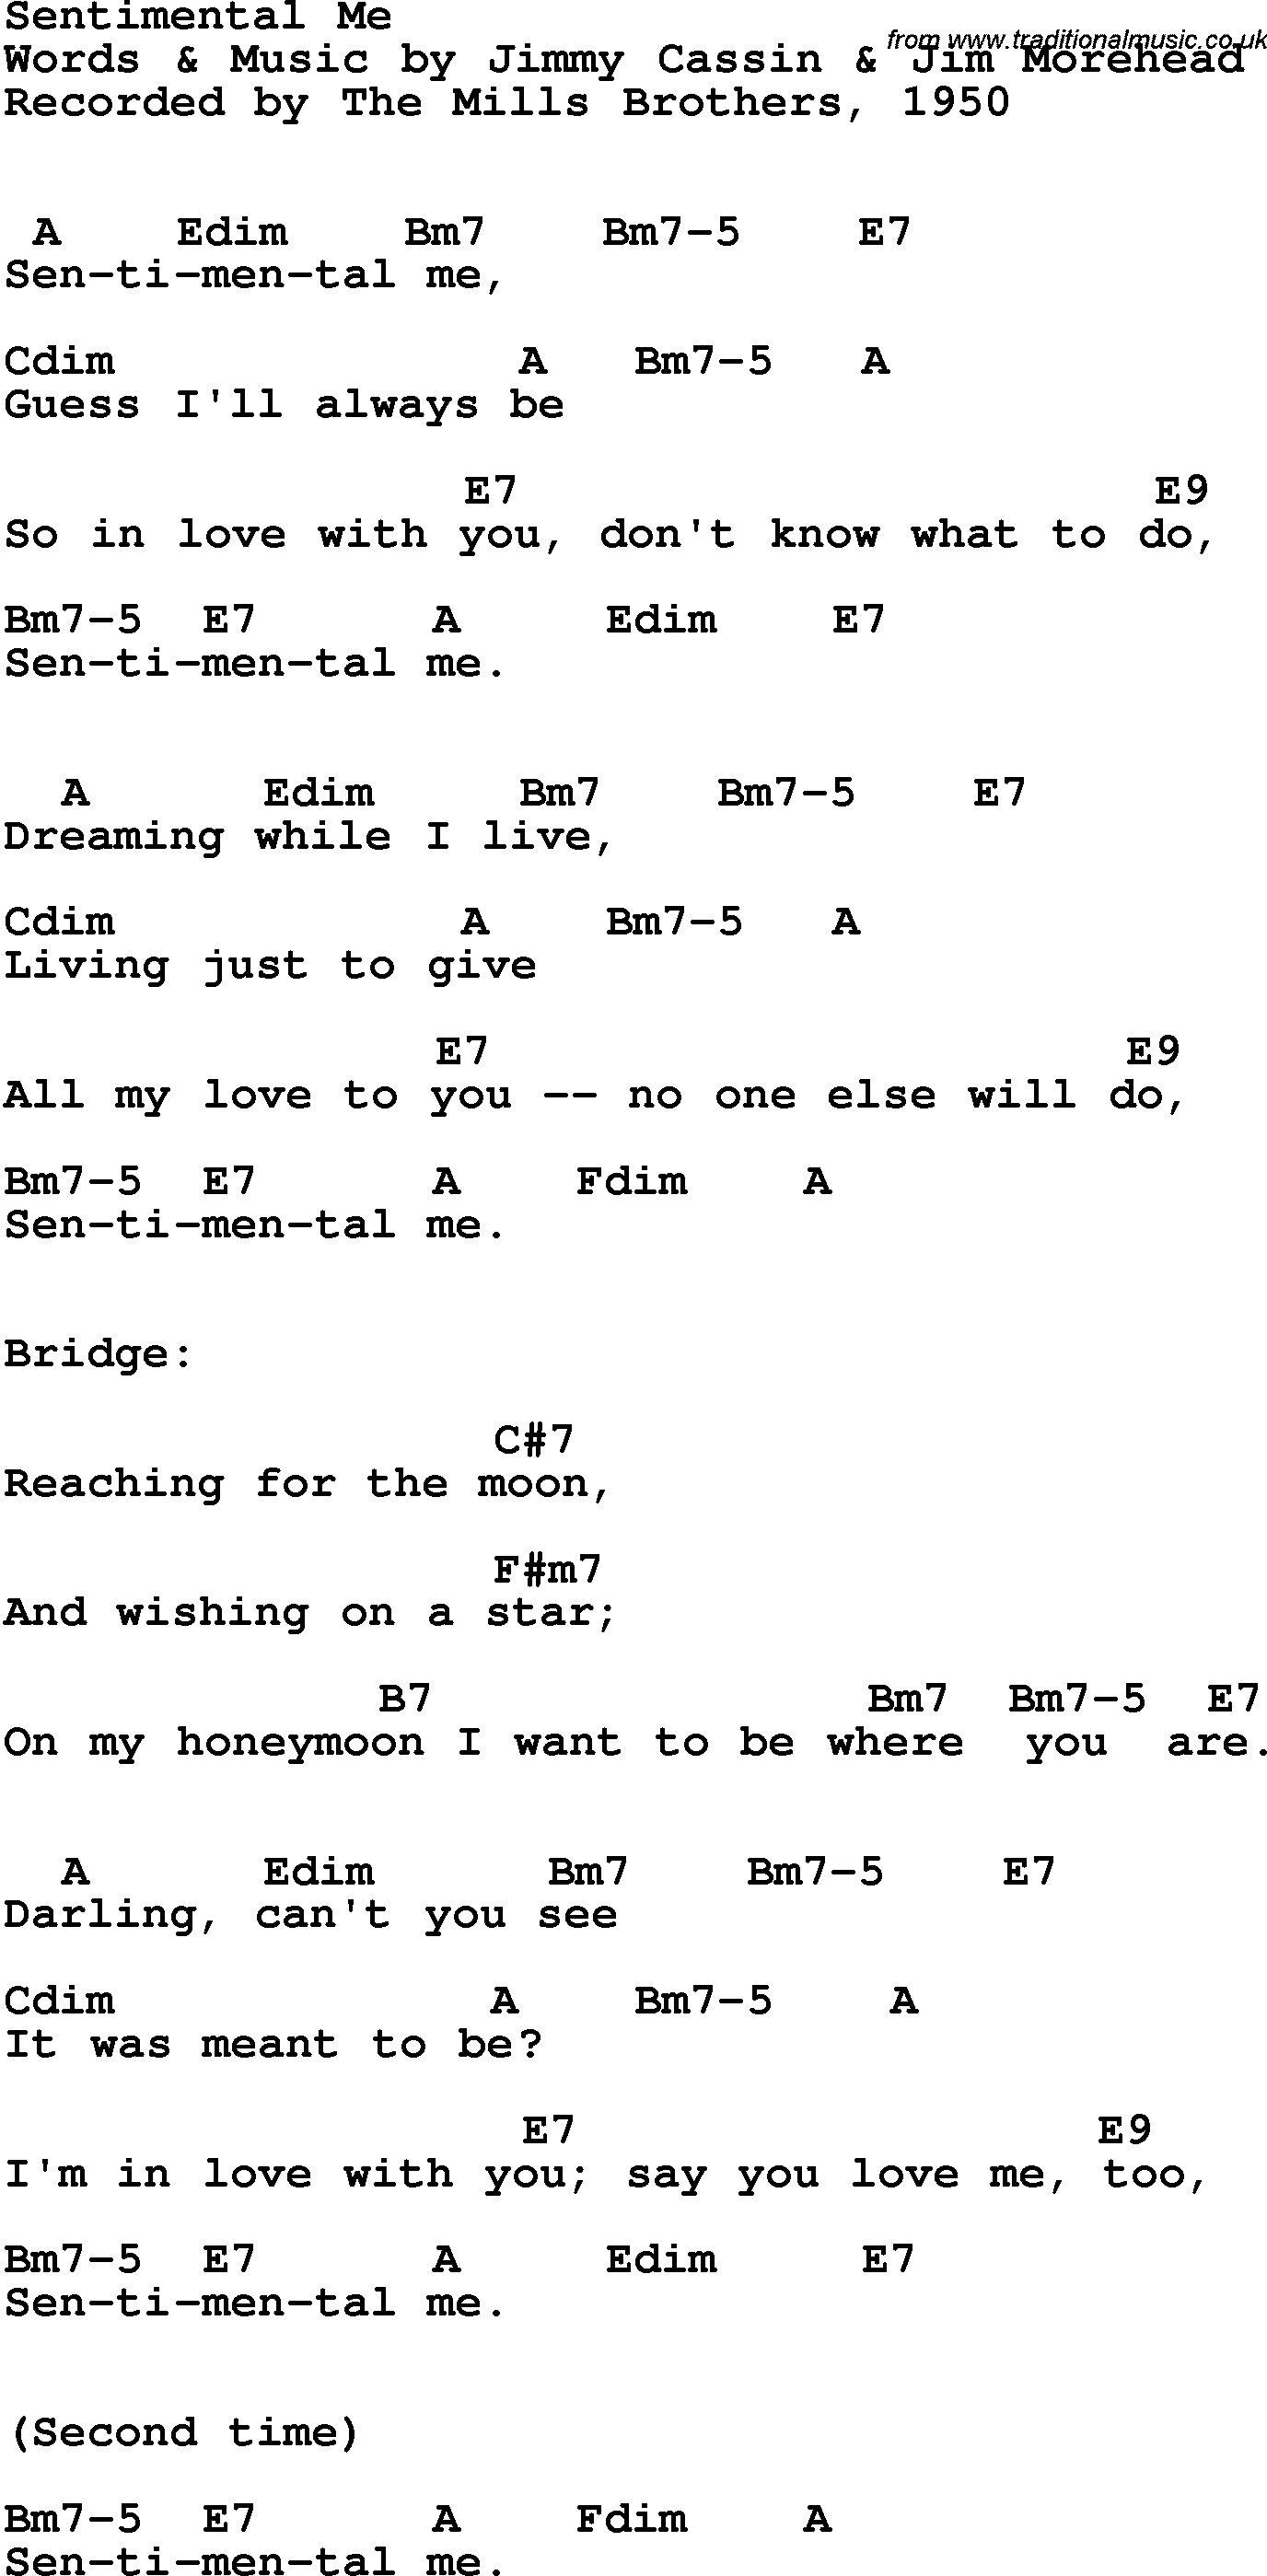 Song Lyrics with guitar chords for Sentimental Me - The Ames Brothers, 1950